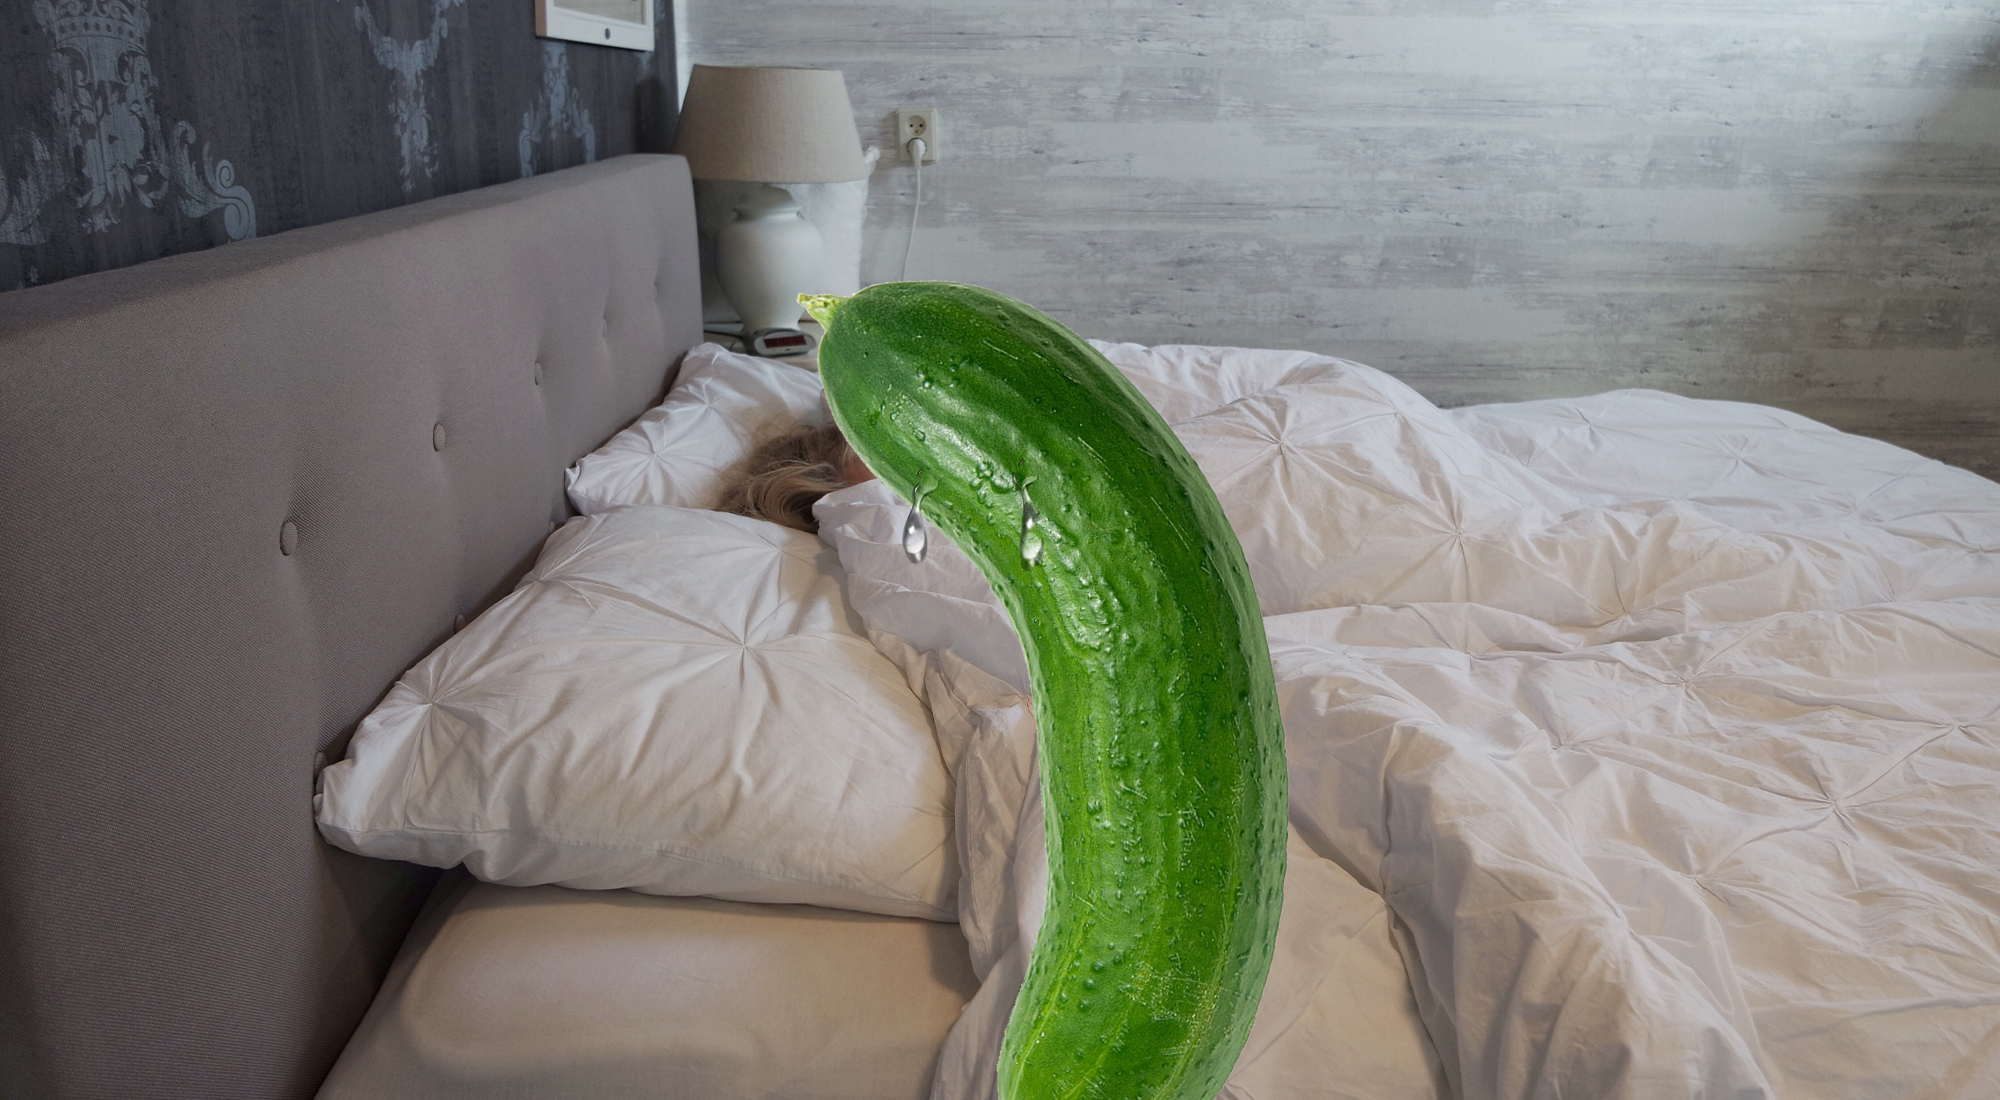 Best of How to have sex with a cucumber